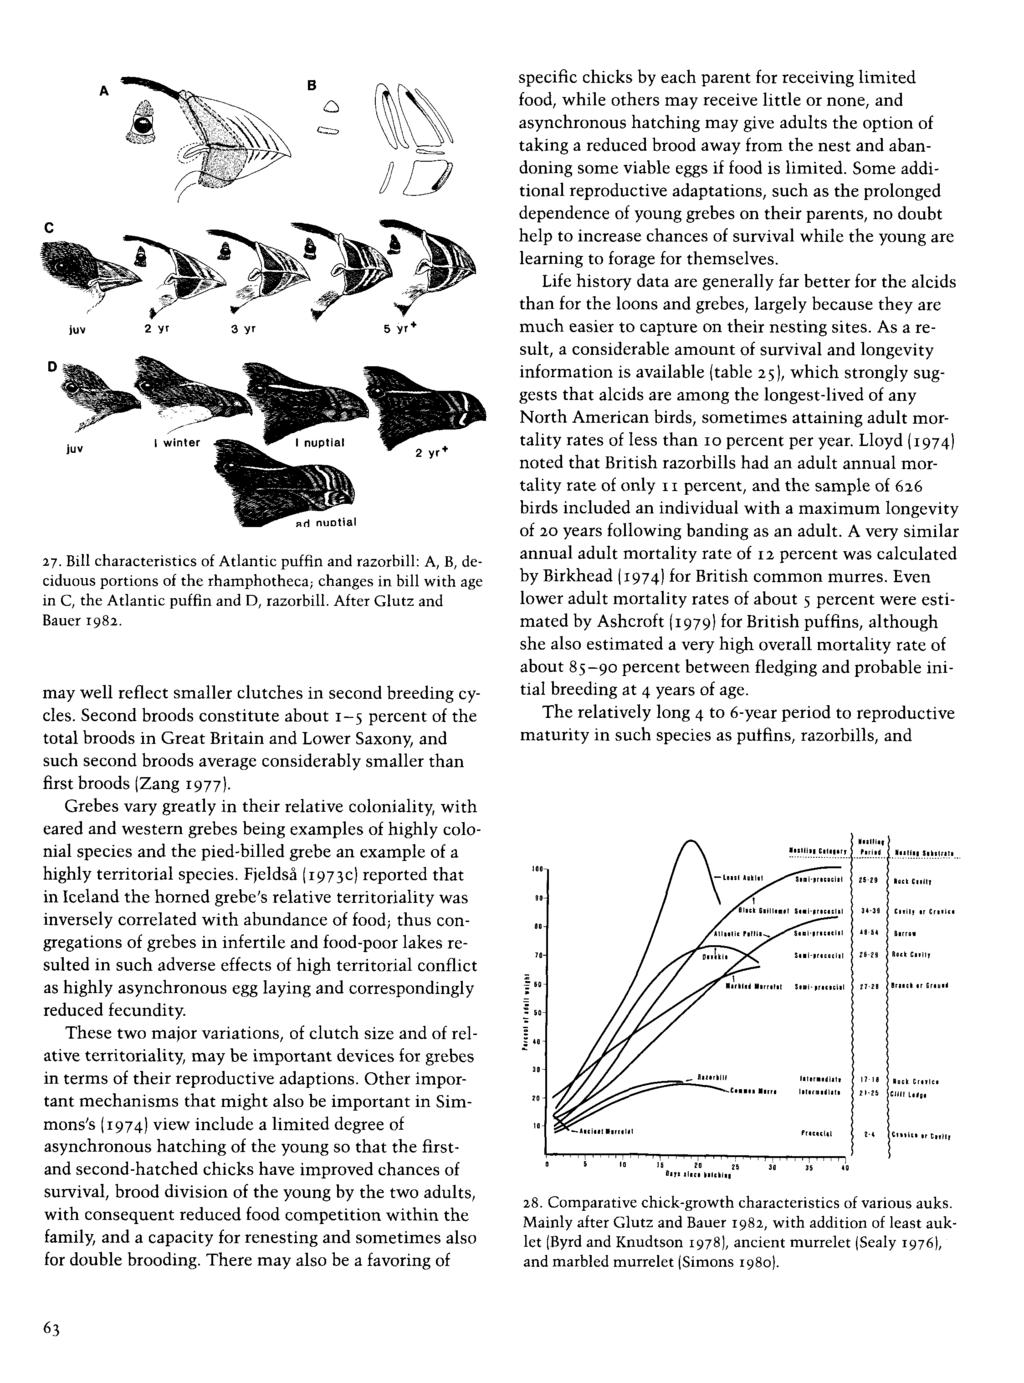 iuv 5 yr* 7. Bill characteristics of Atlantic puffin and razorbill: A, B, deciduous portions of the rhamphotheca; changes in bill with age in C, the Atlantic puffin and D, razorbill.